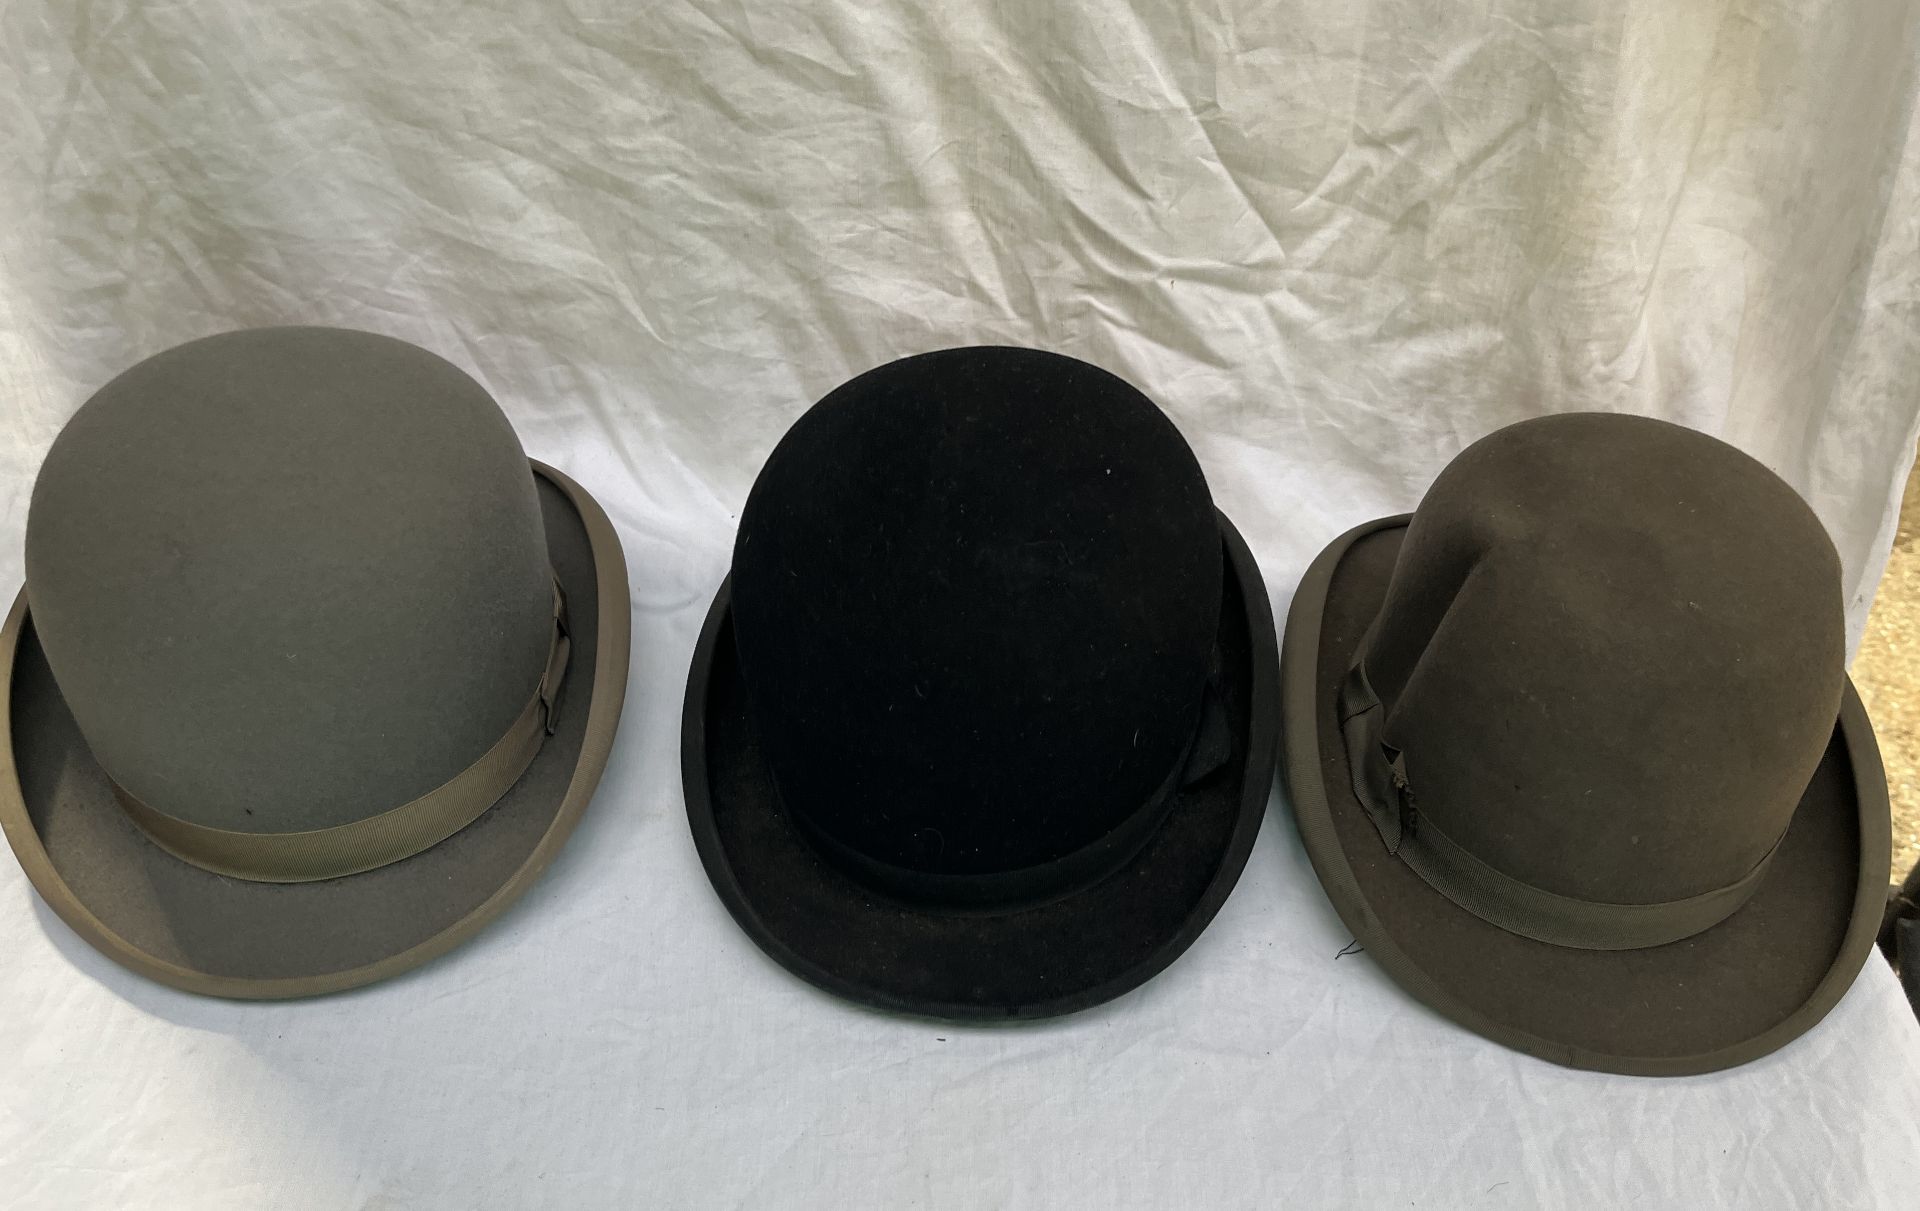 Five grey bowler hats and a black bowler hat - Image 2 of 3